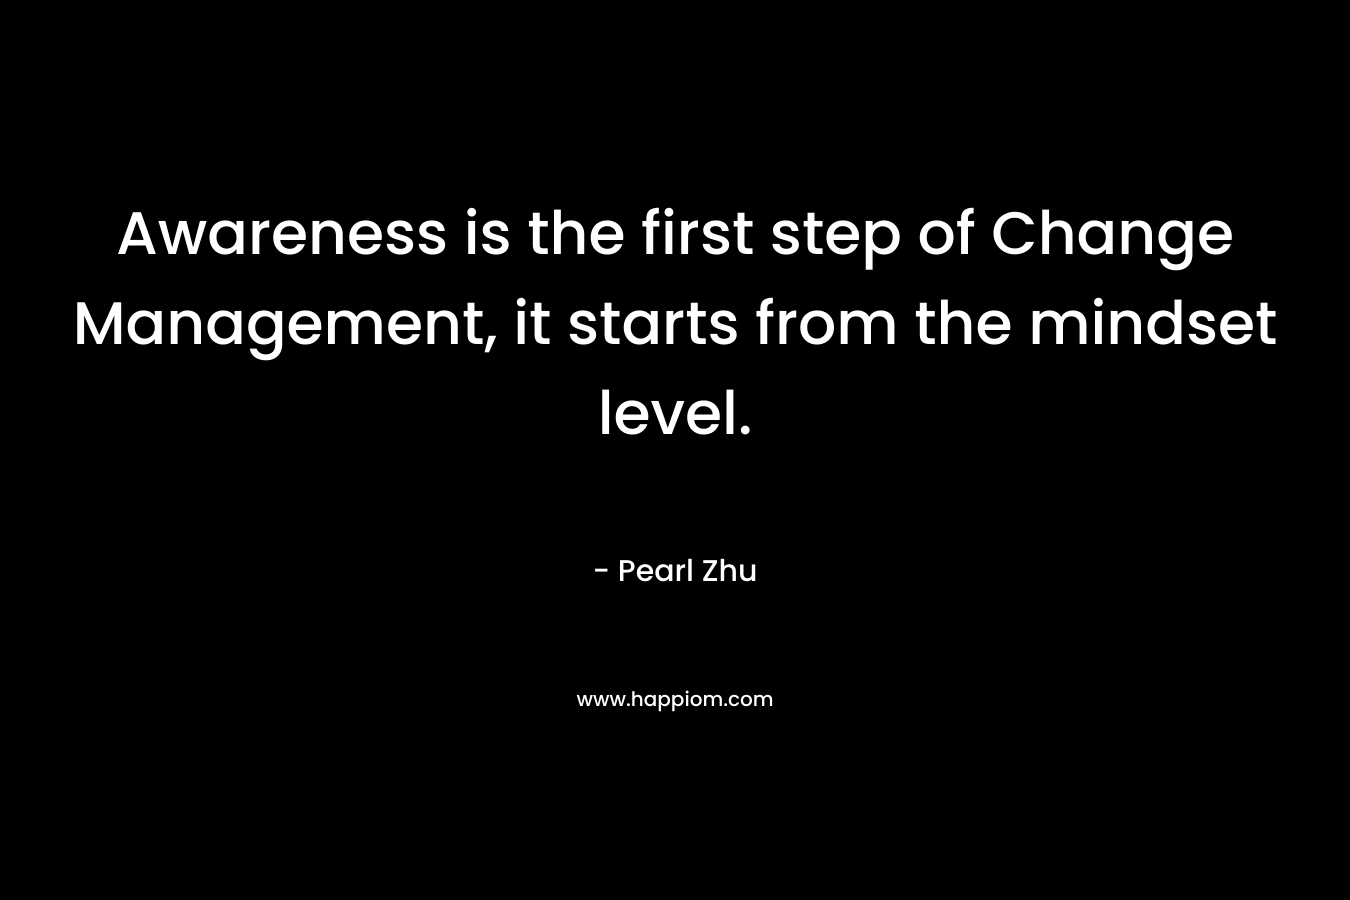 Awareness is the first step of Change Management, it starts from the mindset level.